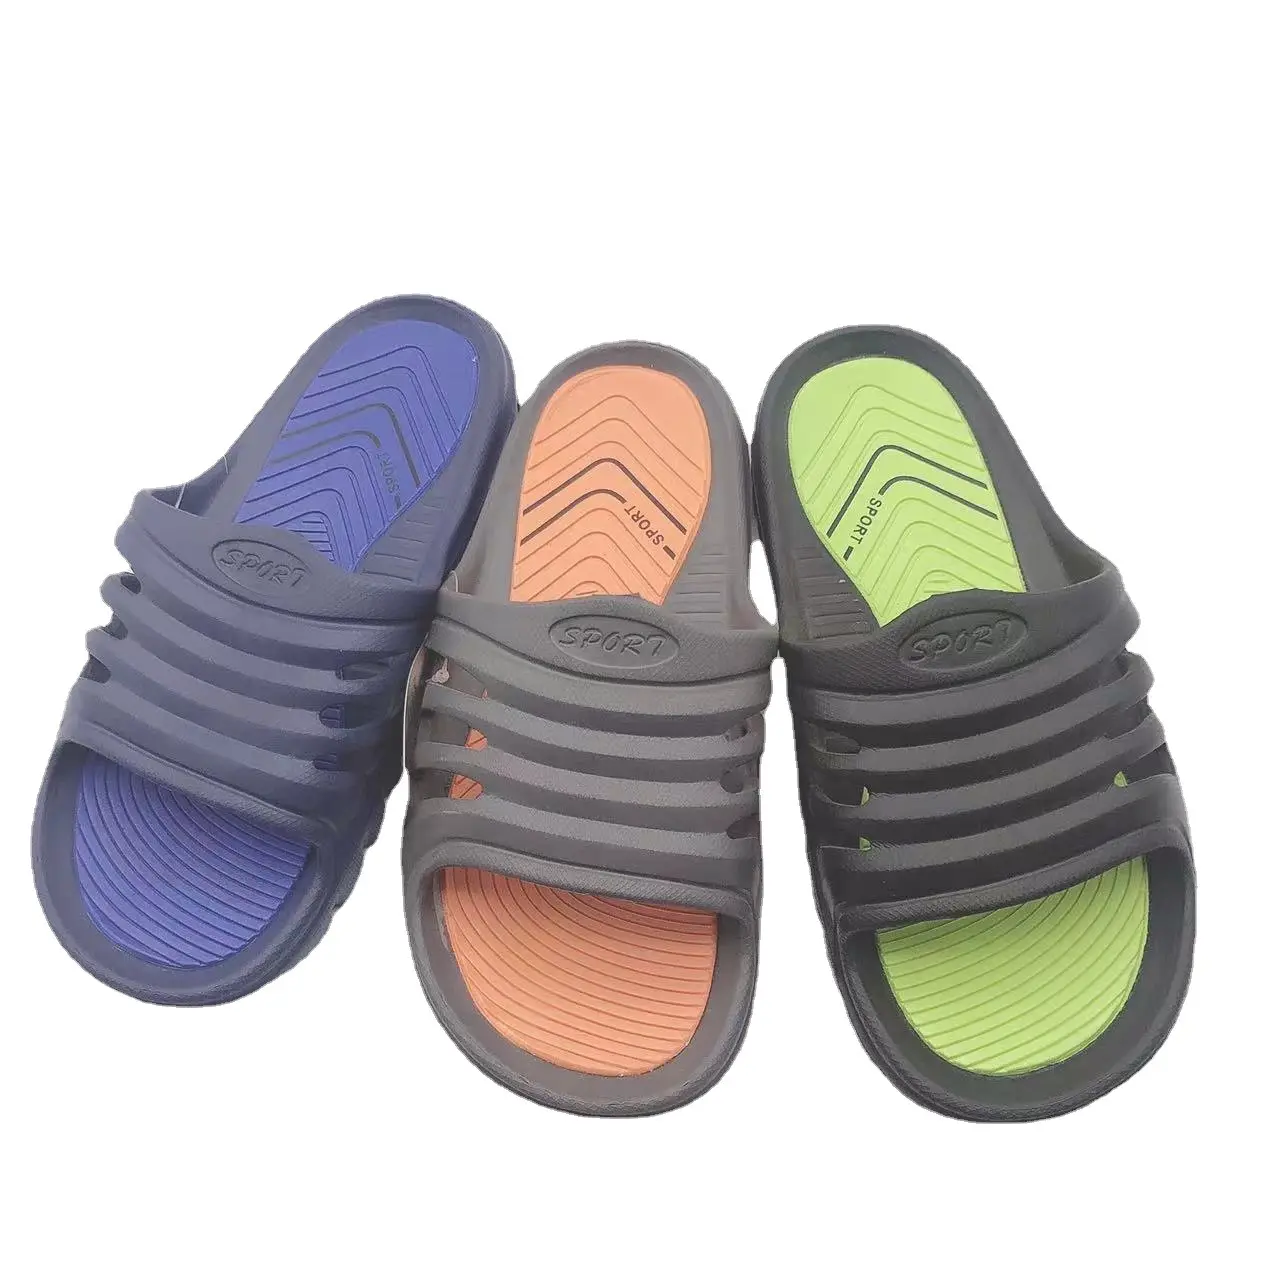 Breathable Sandals And Slippers For Women And Man Casual Comfort Slippers Best Price Wholesale Sneaker Slippers